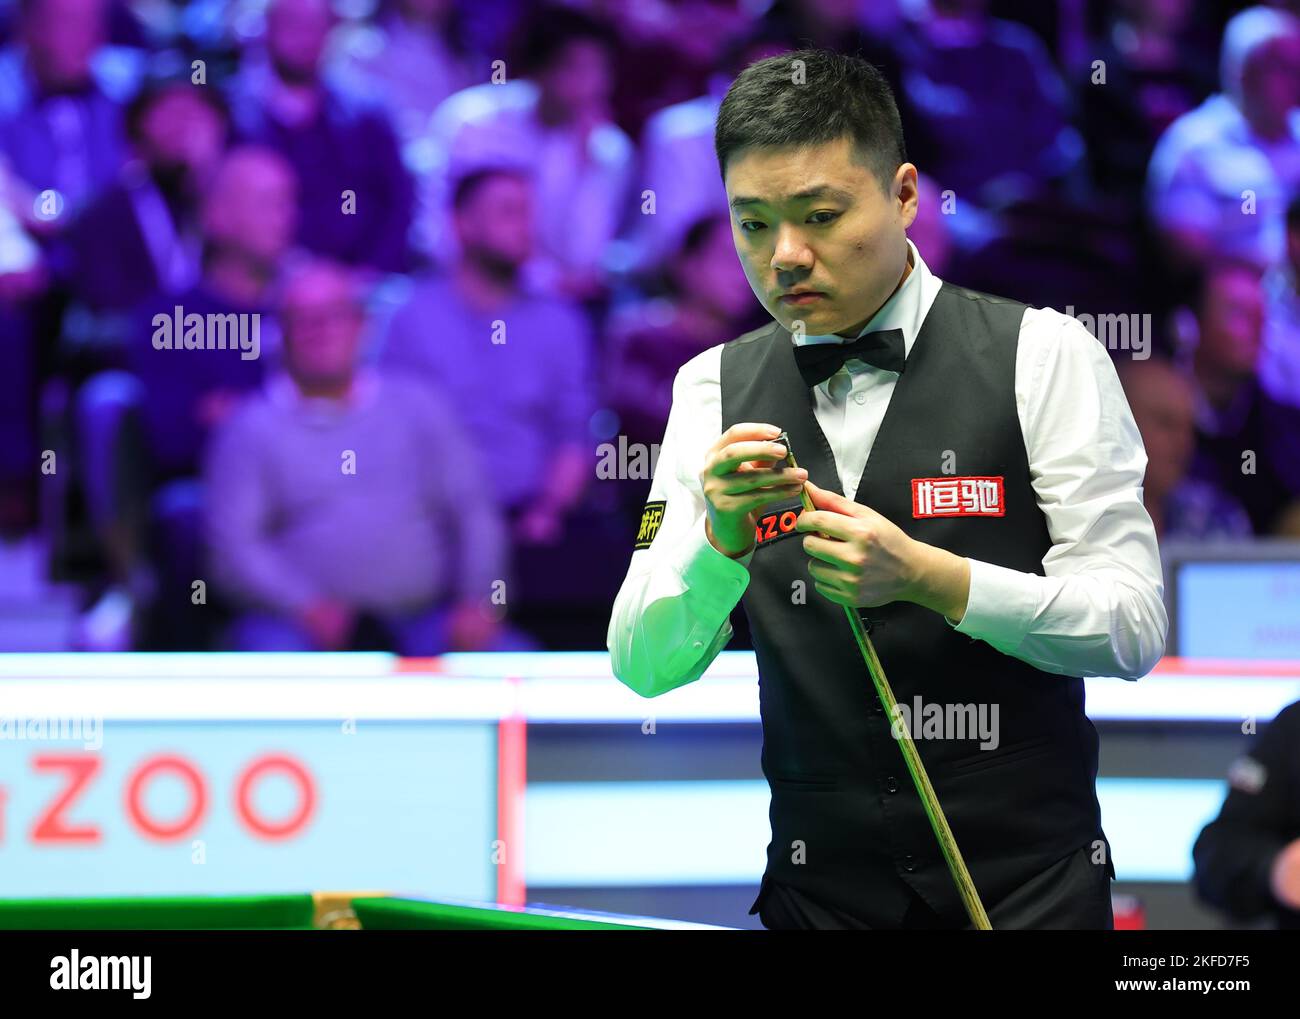 York, Britain. 17th Nov, 2022. Ding Junhui of China competes during the second round match against Jamie Clarke of Wales at 2022 UK Snooker Championship in York, Britain, Nov